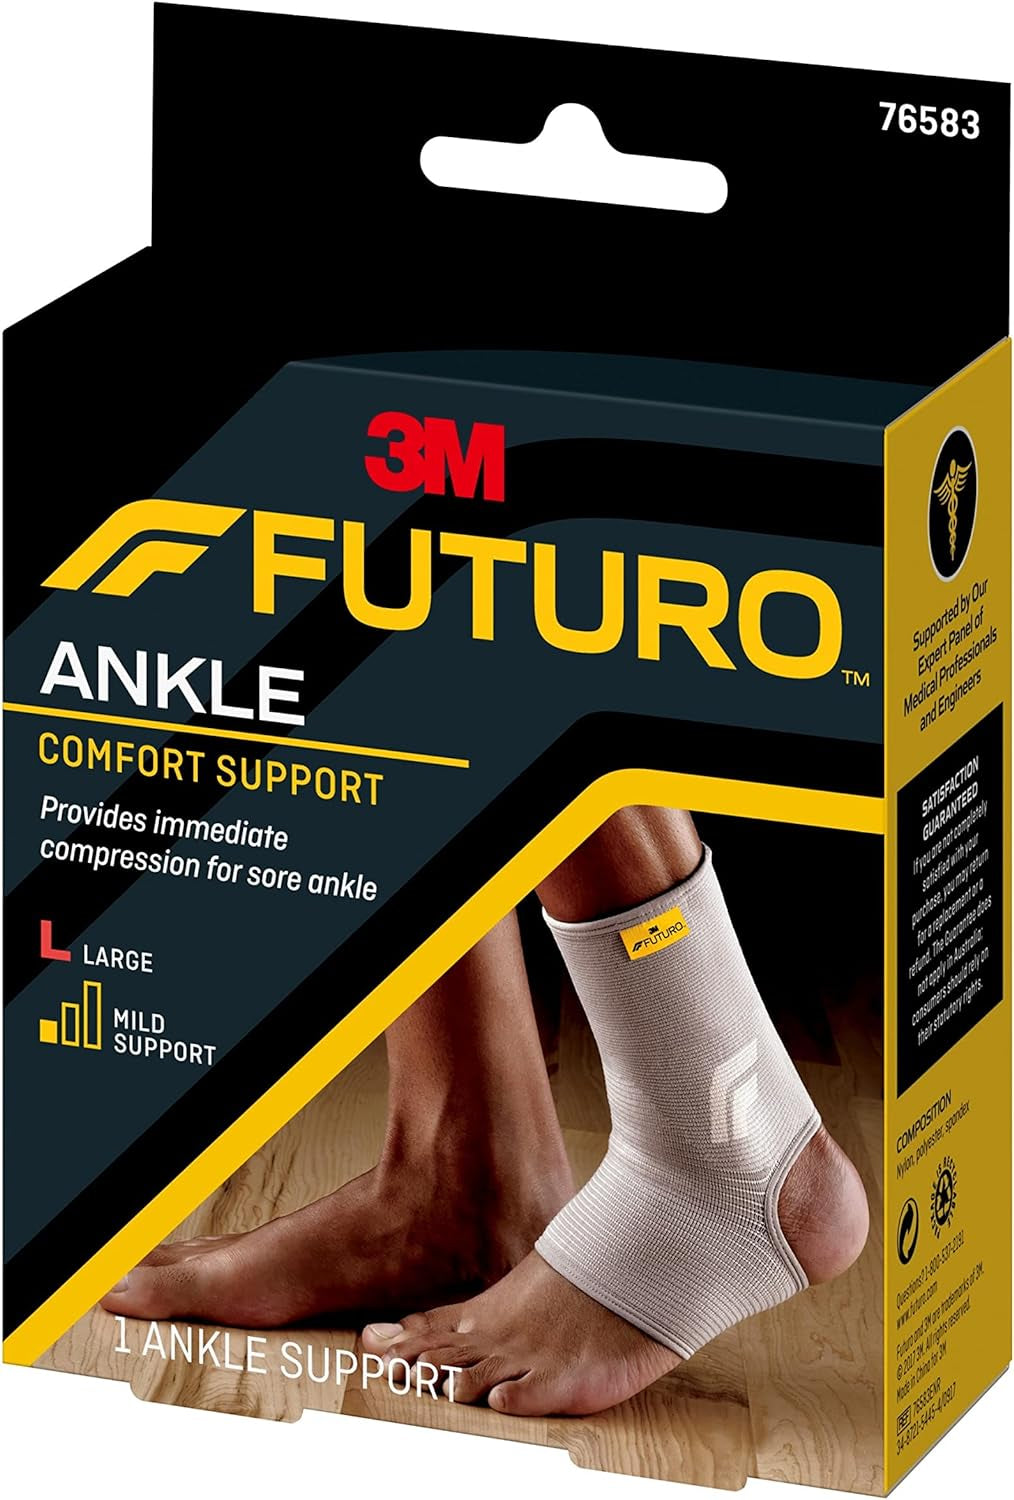 FUTURO Comfort Ankle Support, Large